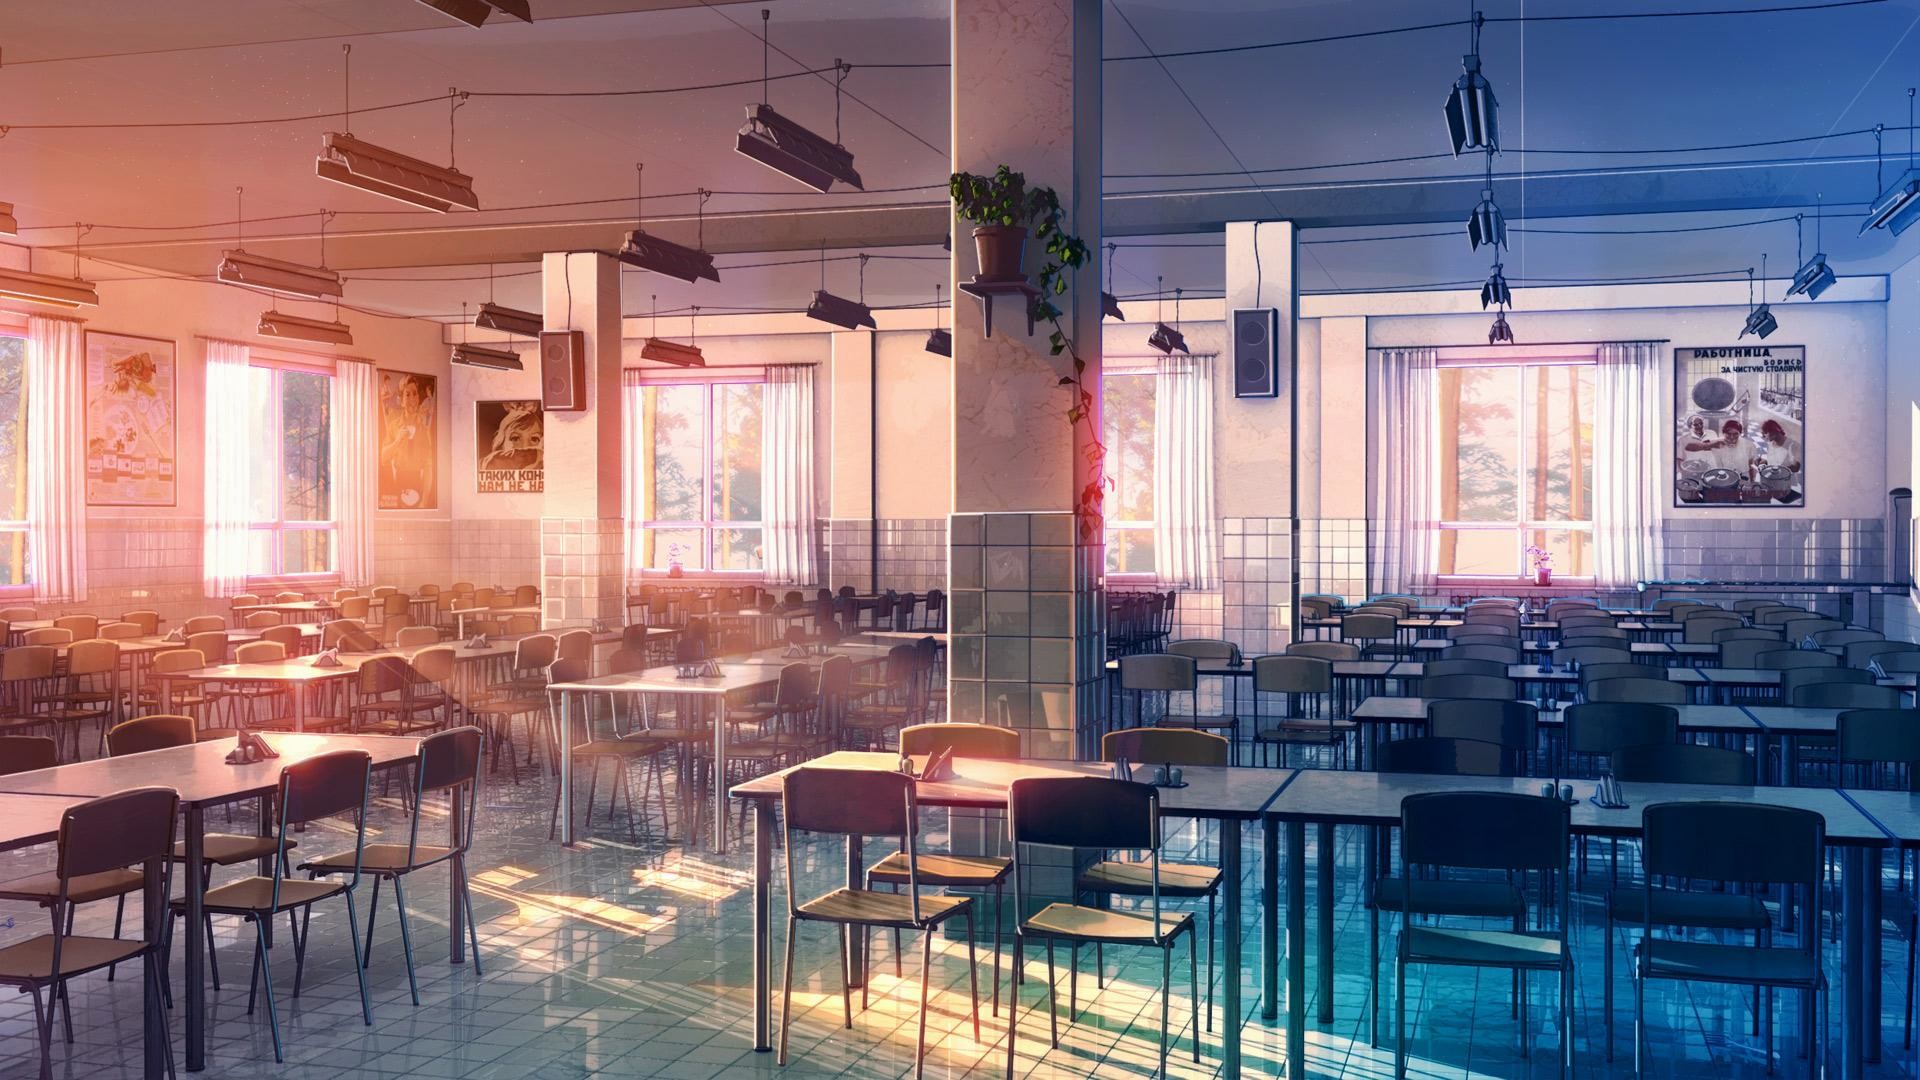 1920x1080 ANIME-ART-anime-scenery-school-cafeteria-tables-chairs-